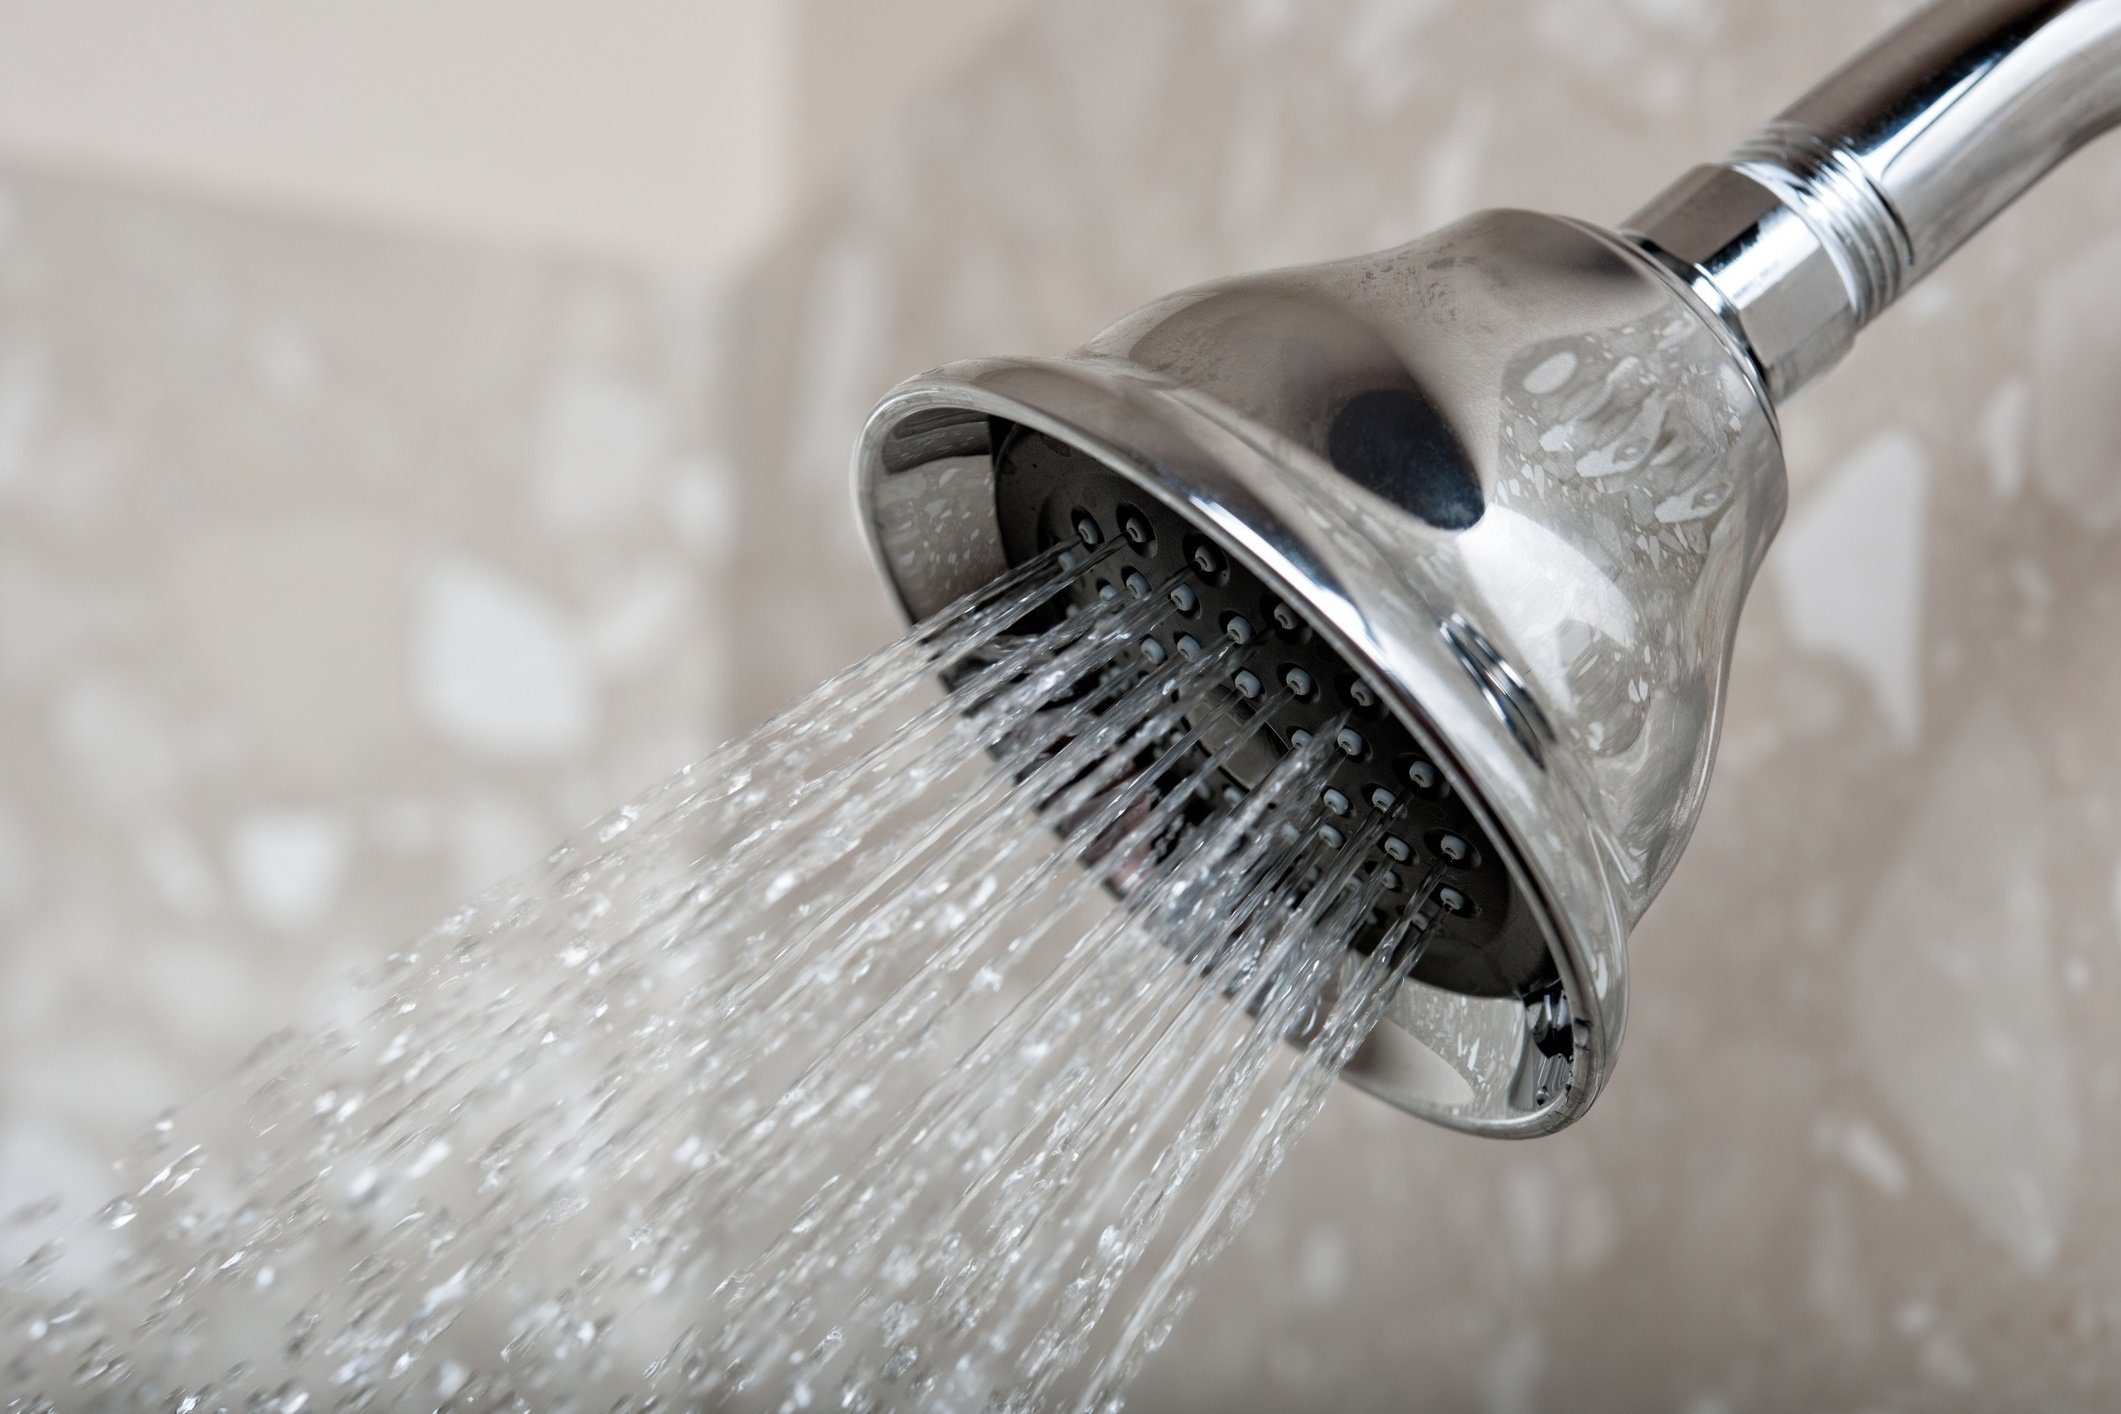 Leaky Shower Head Problems You Or A Chico Plumber Can Fix